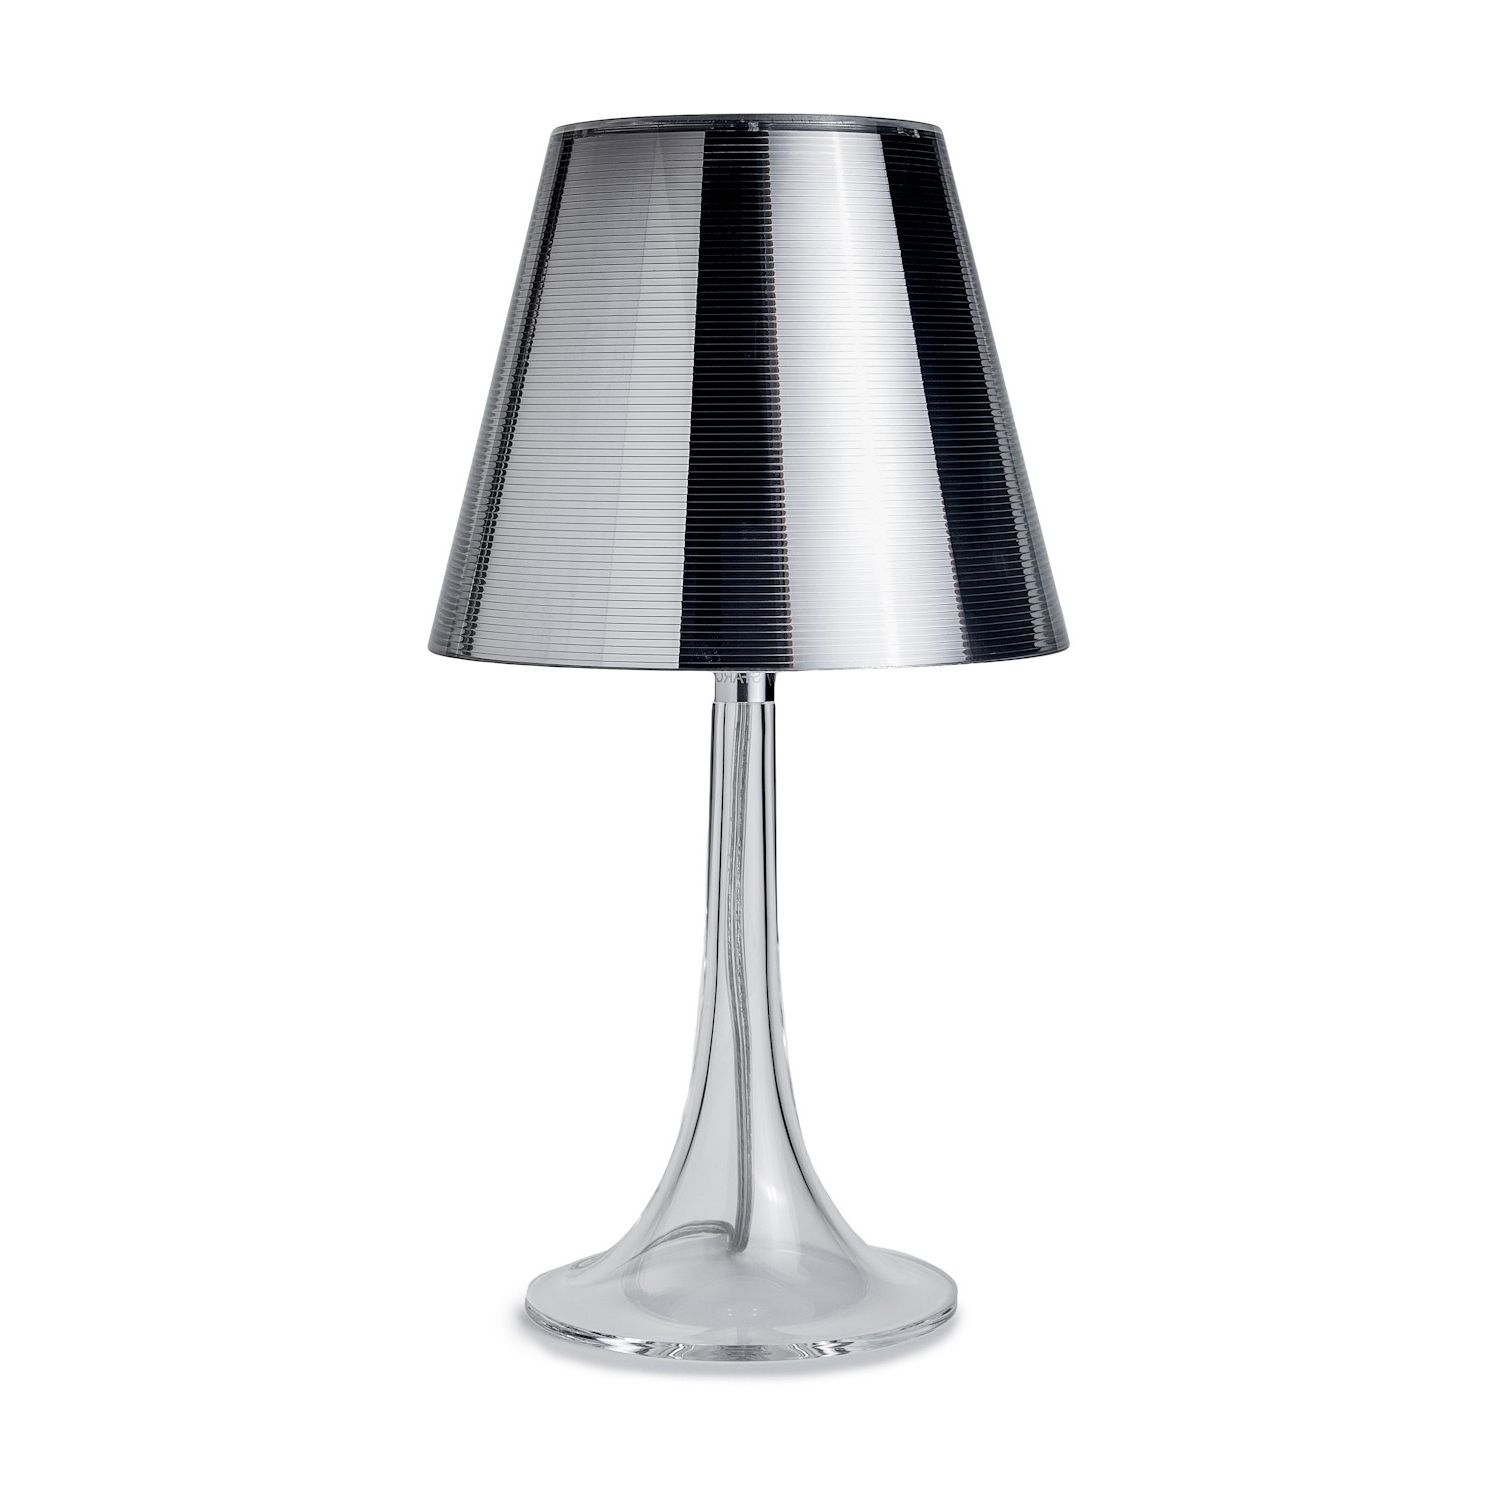 Current John Lewis Table Lamps For Living Room Pertaining To Furniture : Contemporary Desk Lamps Office Magnificent Table John (View 12 of 15)